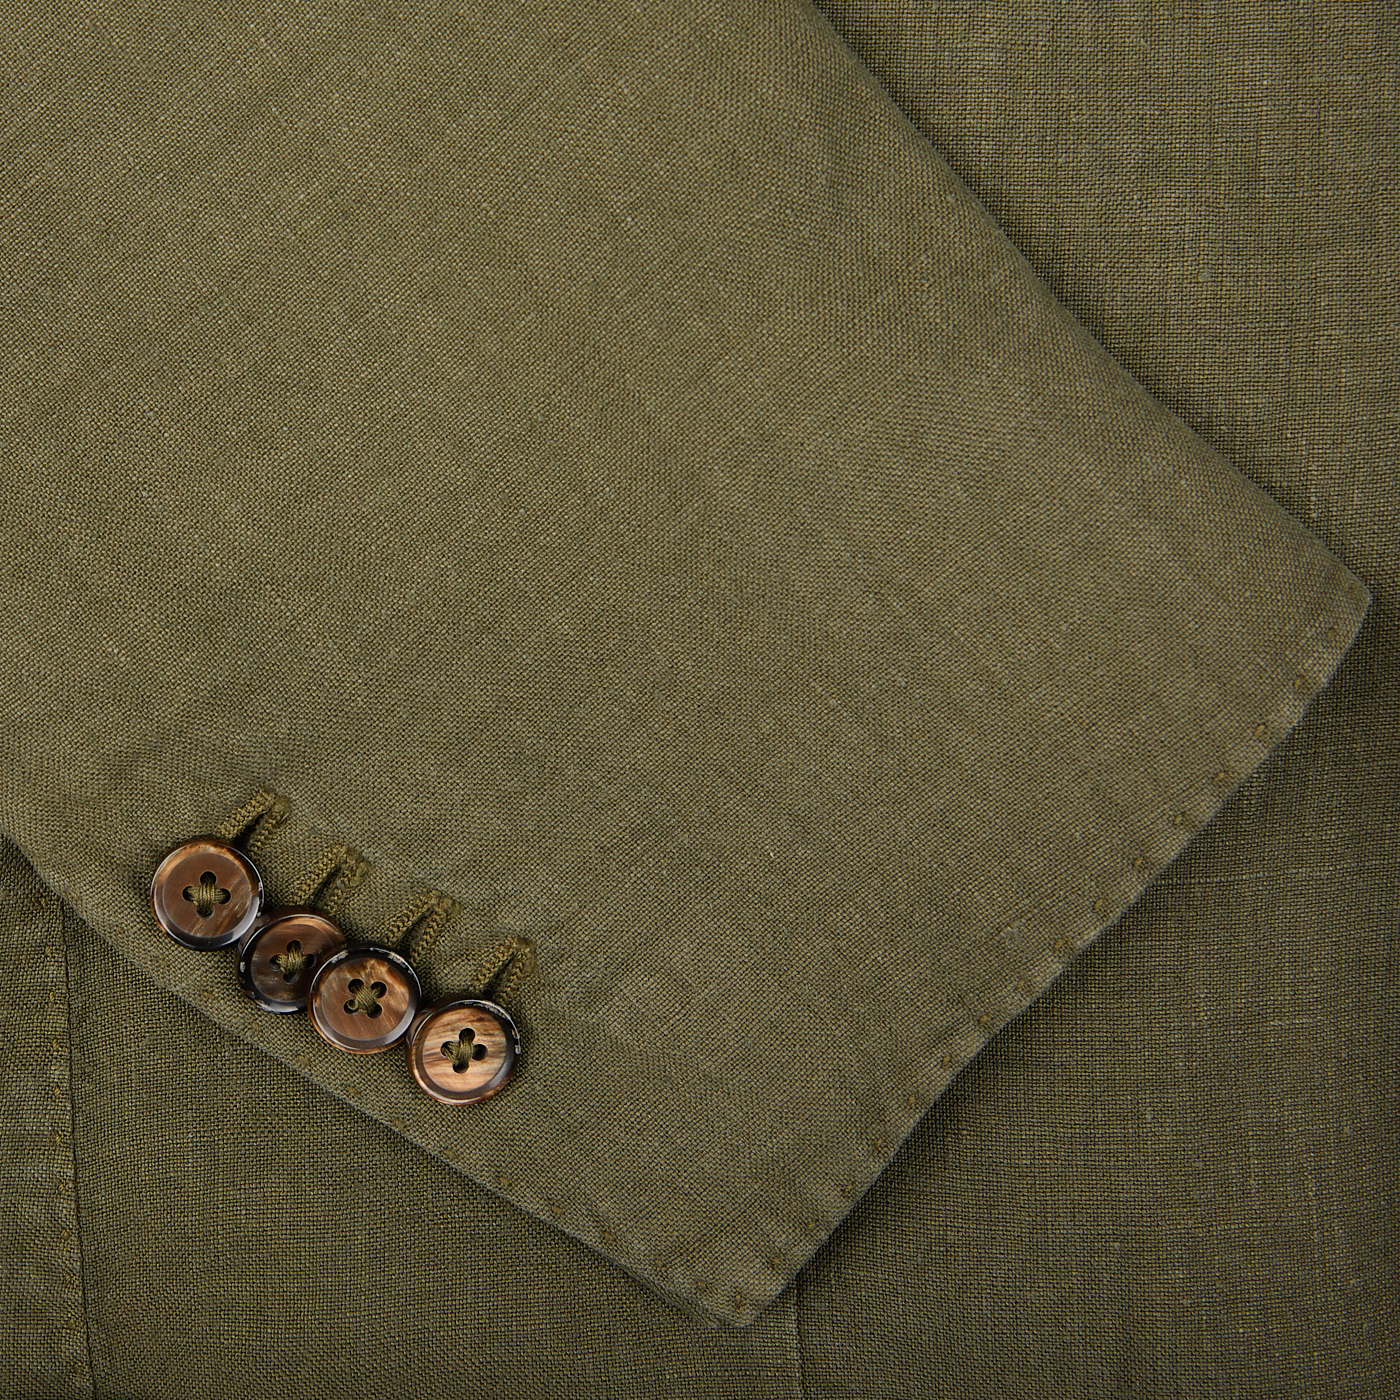 Grass Green Washed Linen Blazer with a flap and four brown buttons, designed in Italy by L.B.M. 1911.